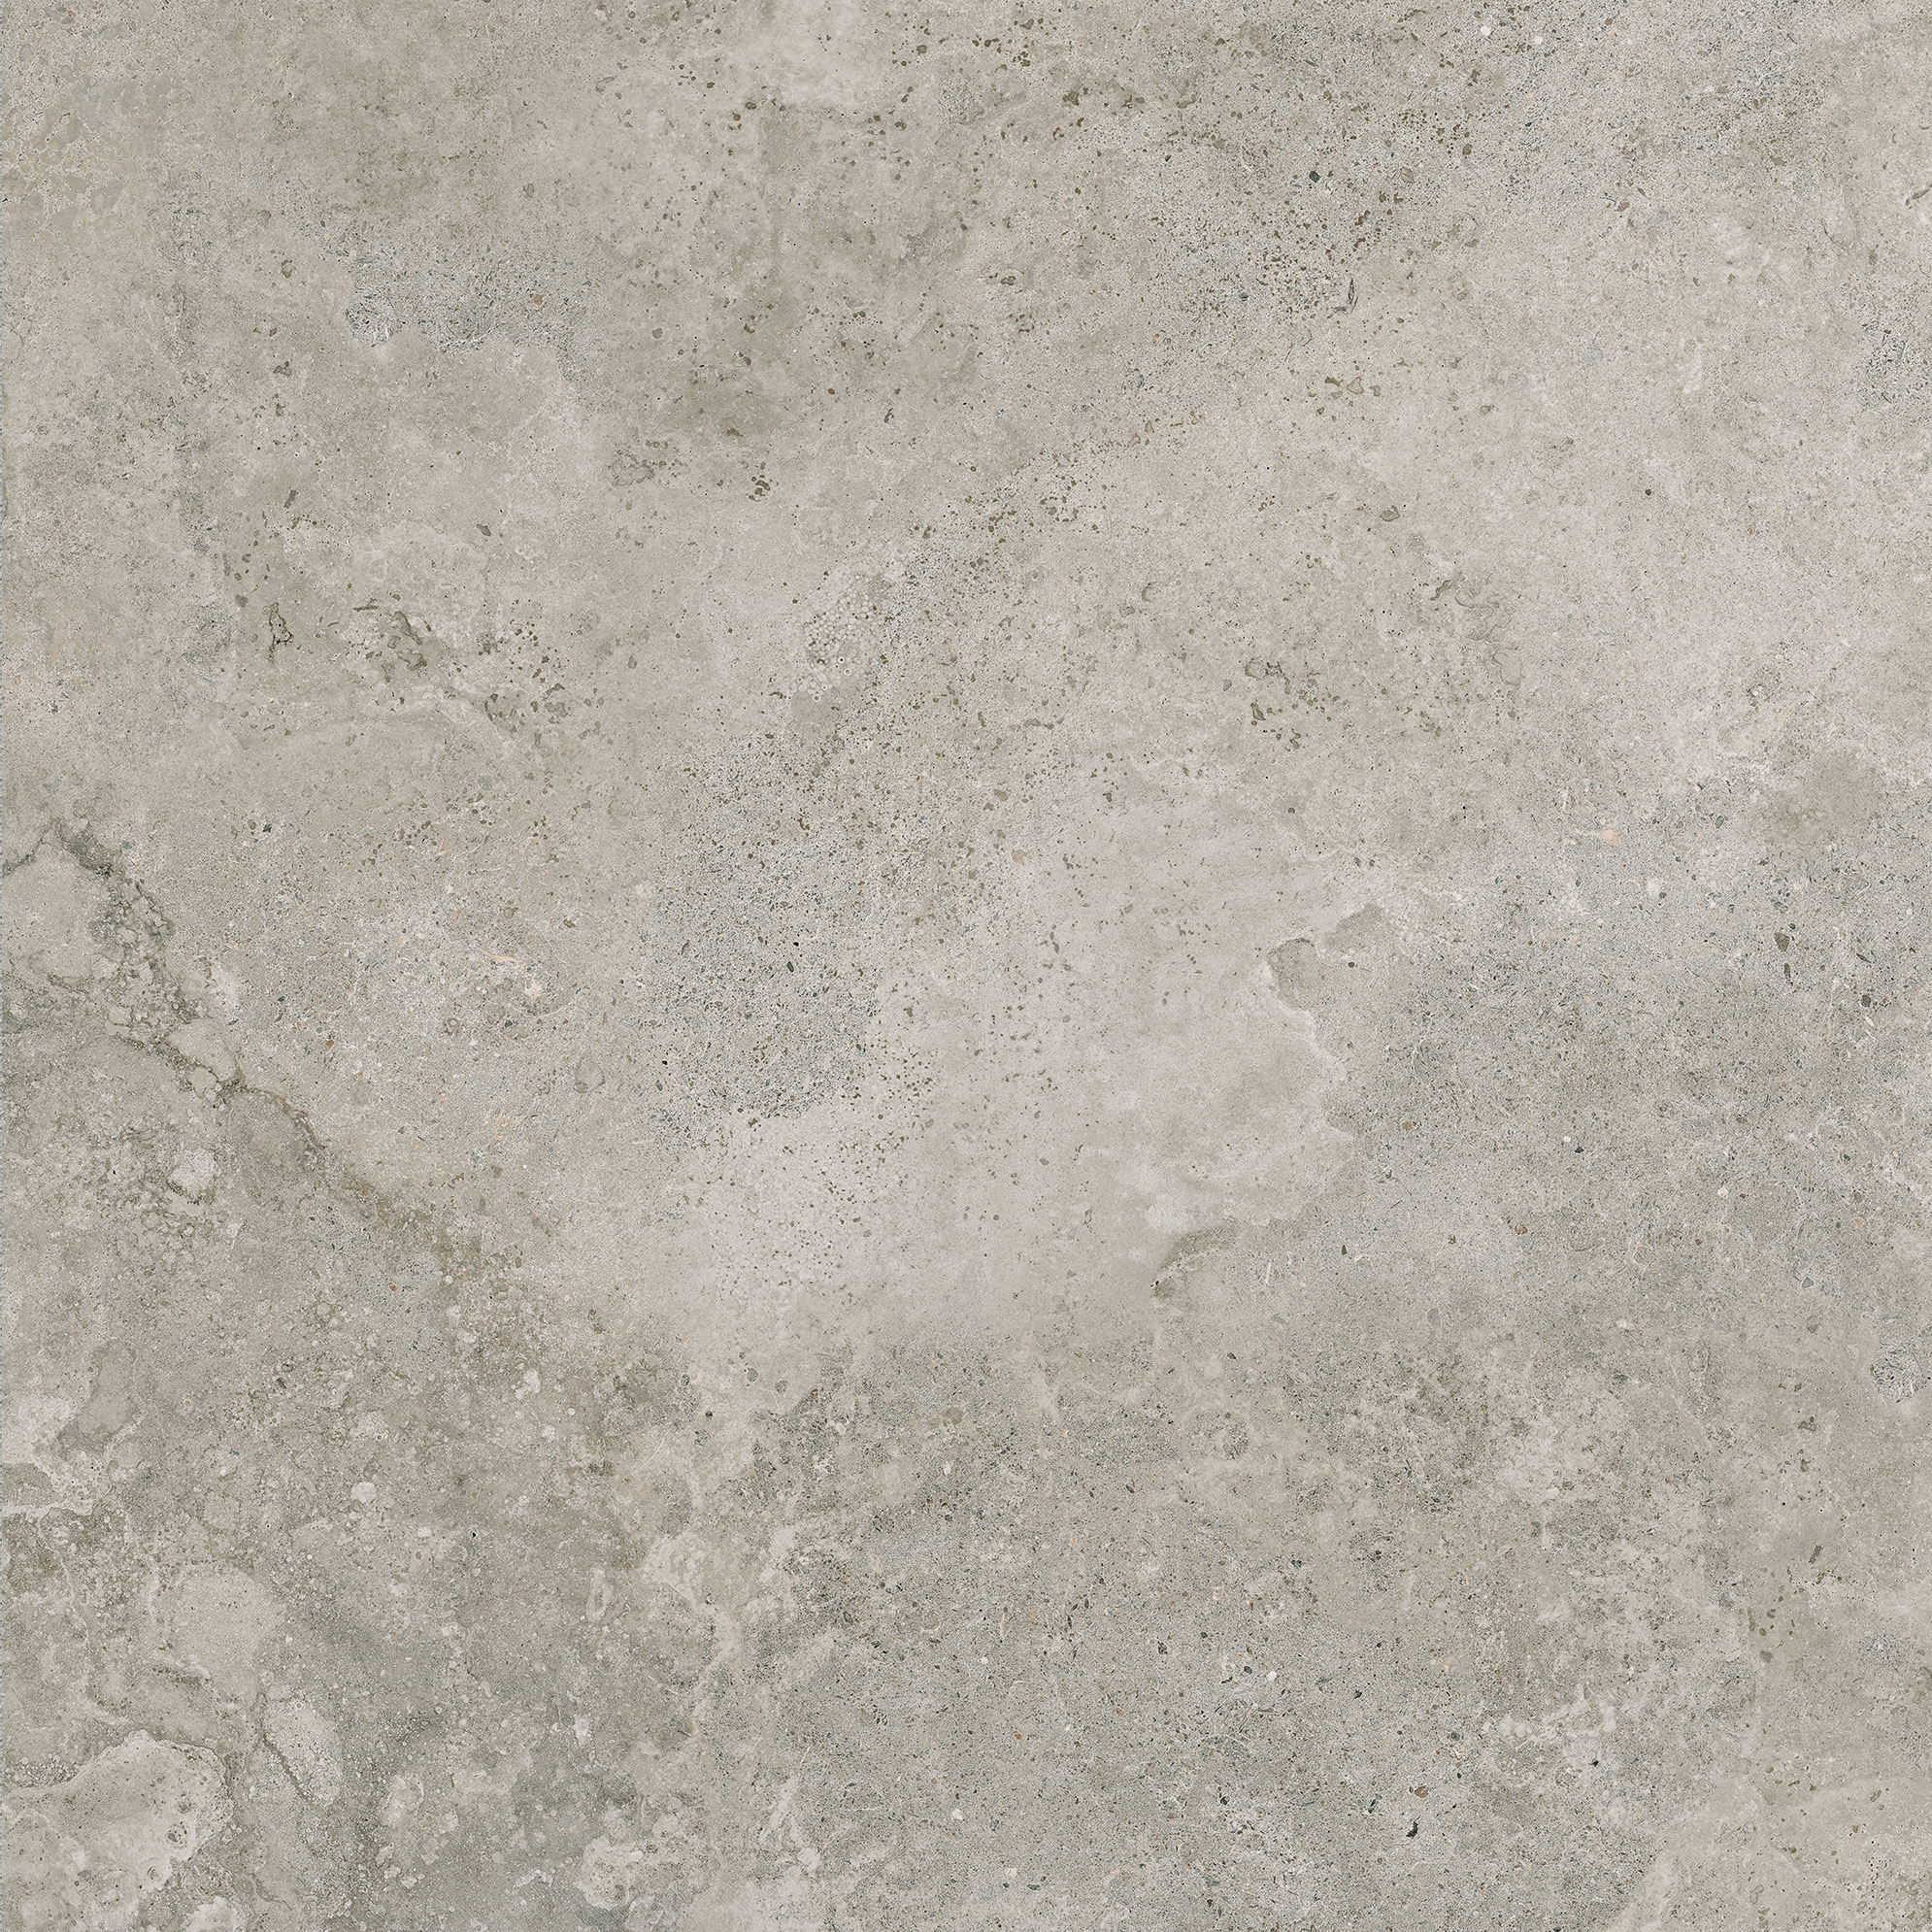 pattern glazed porcelain field tile from veneta anatolia collection distributed by surface group international matte finish pressed edge 20x20 square shape